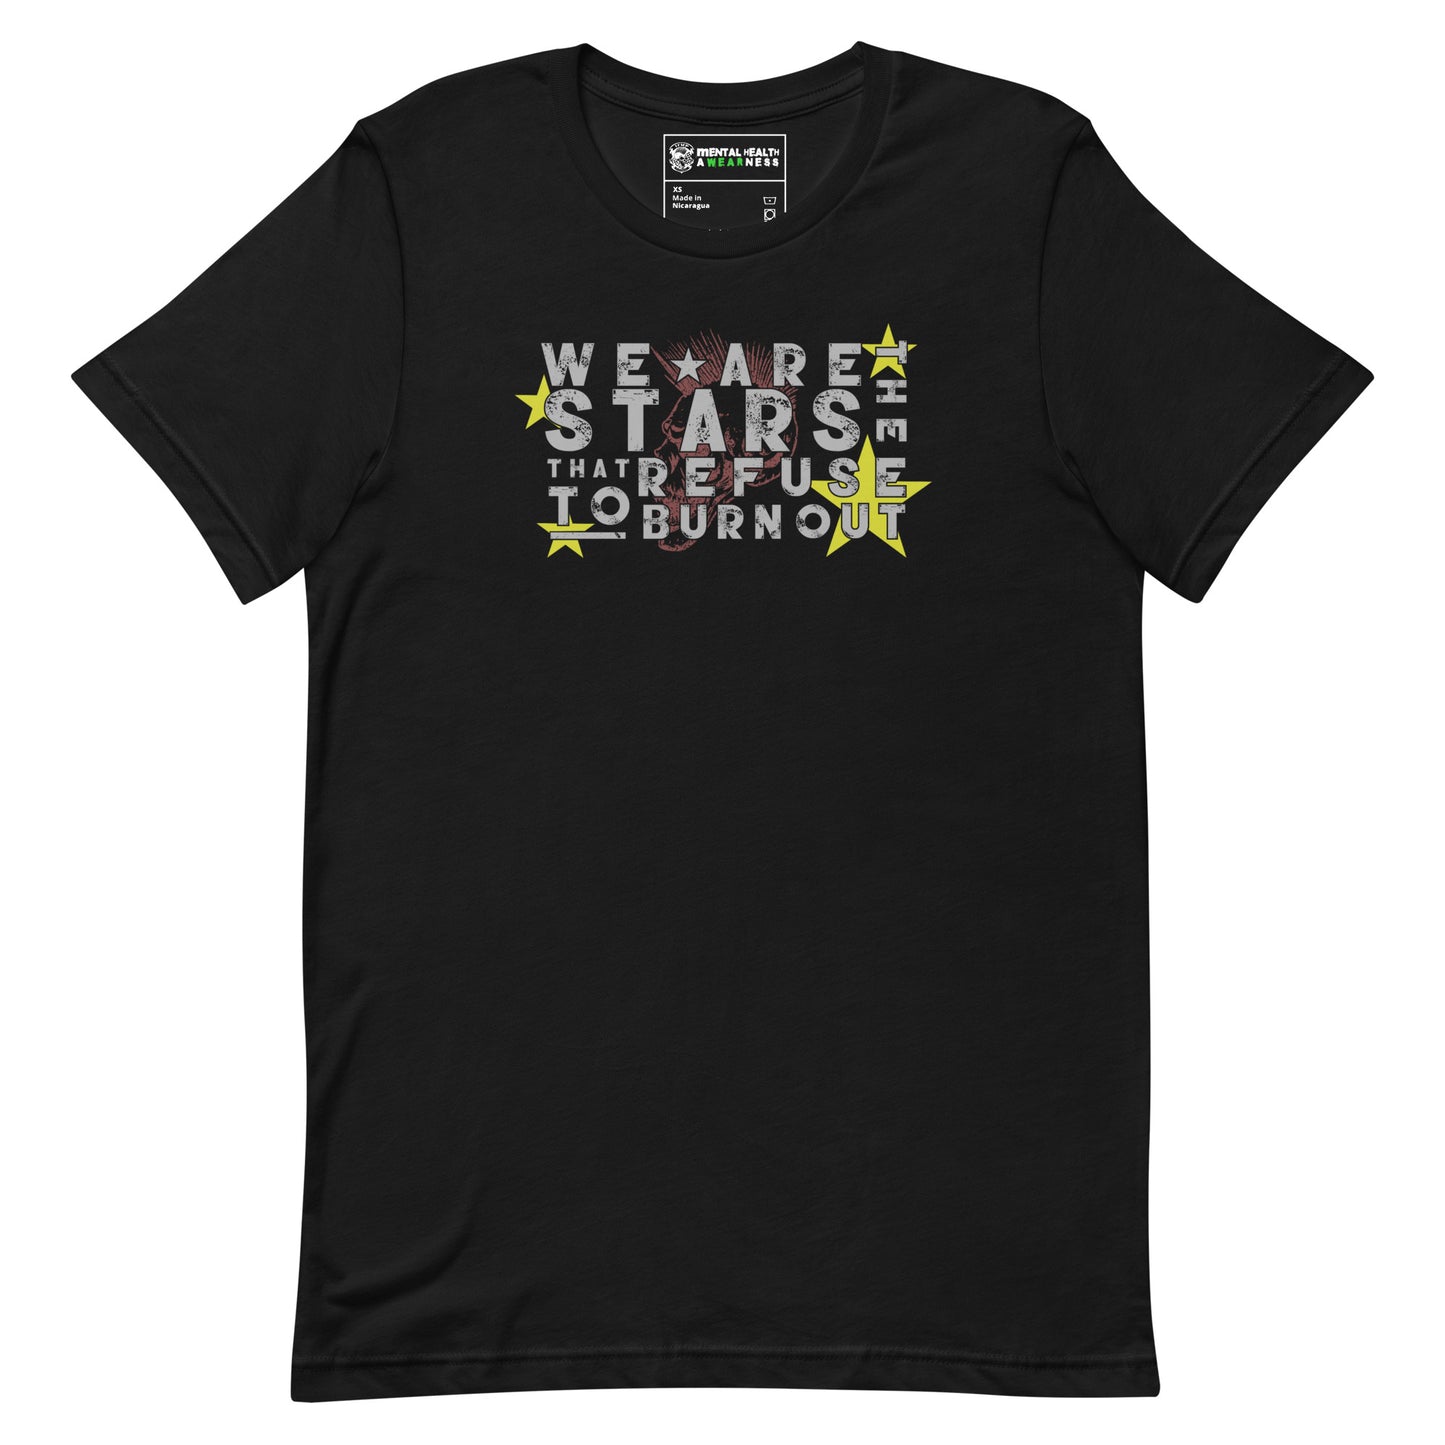 We Are The Stars That Refuse To Burn Out T-Shirt Black Front